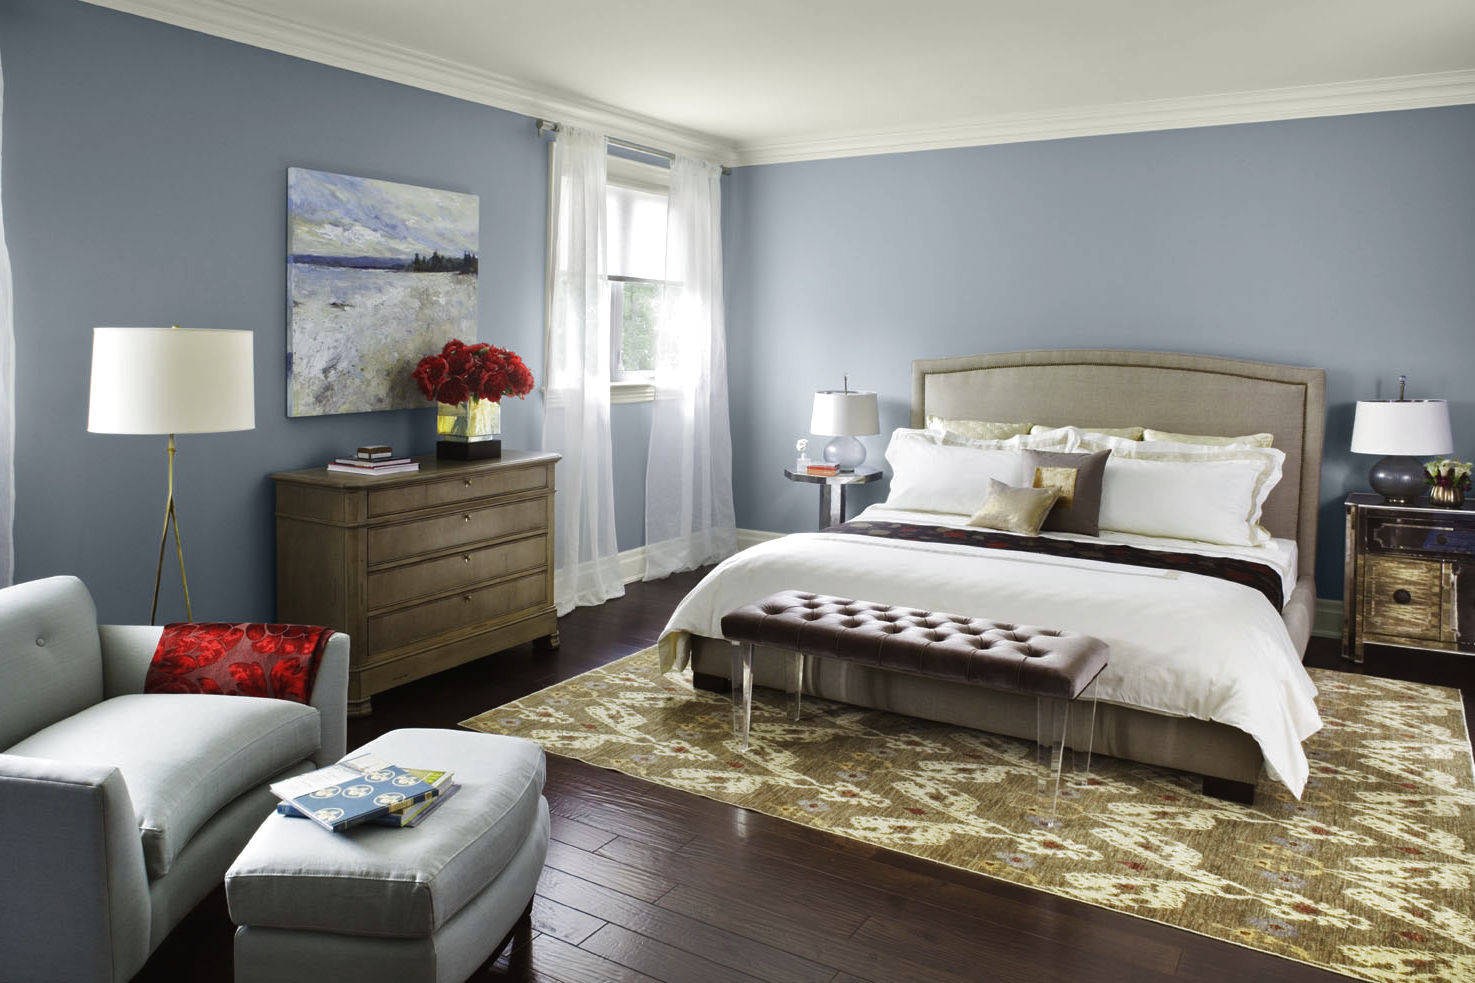 Good Bedroom Paint Colours
 Applying the Accurate Bedroom Paint Colors MidCityEast